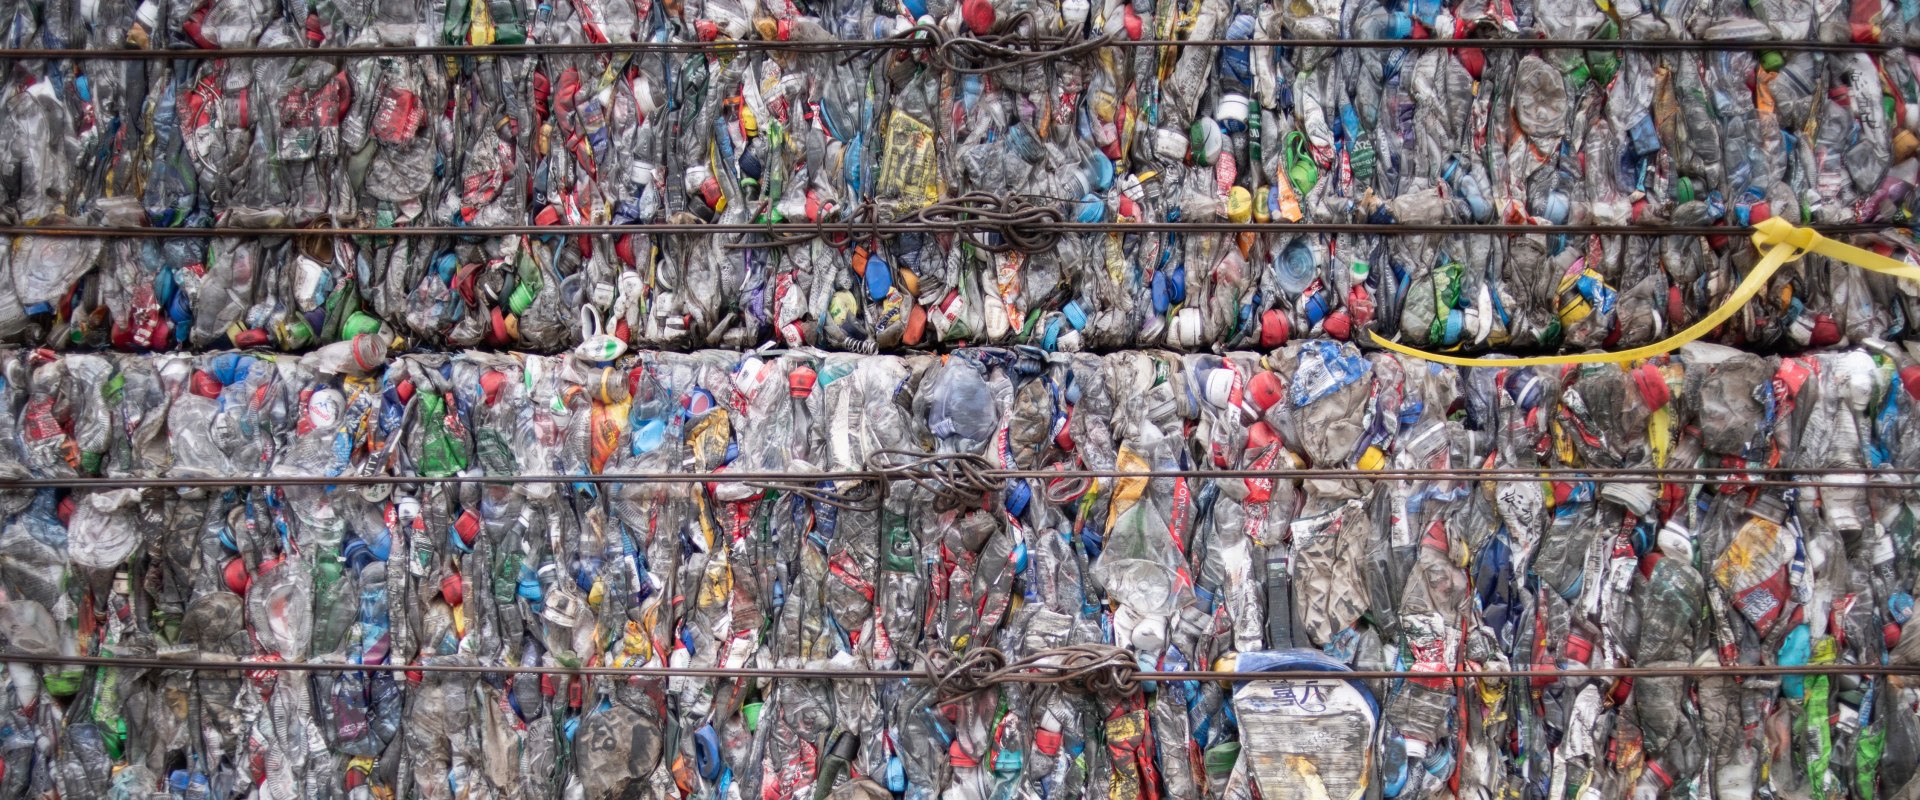 Maine: The State with the Highest Recycling Rate in the US